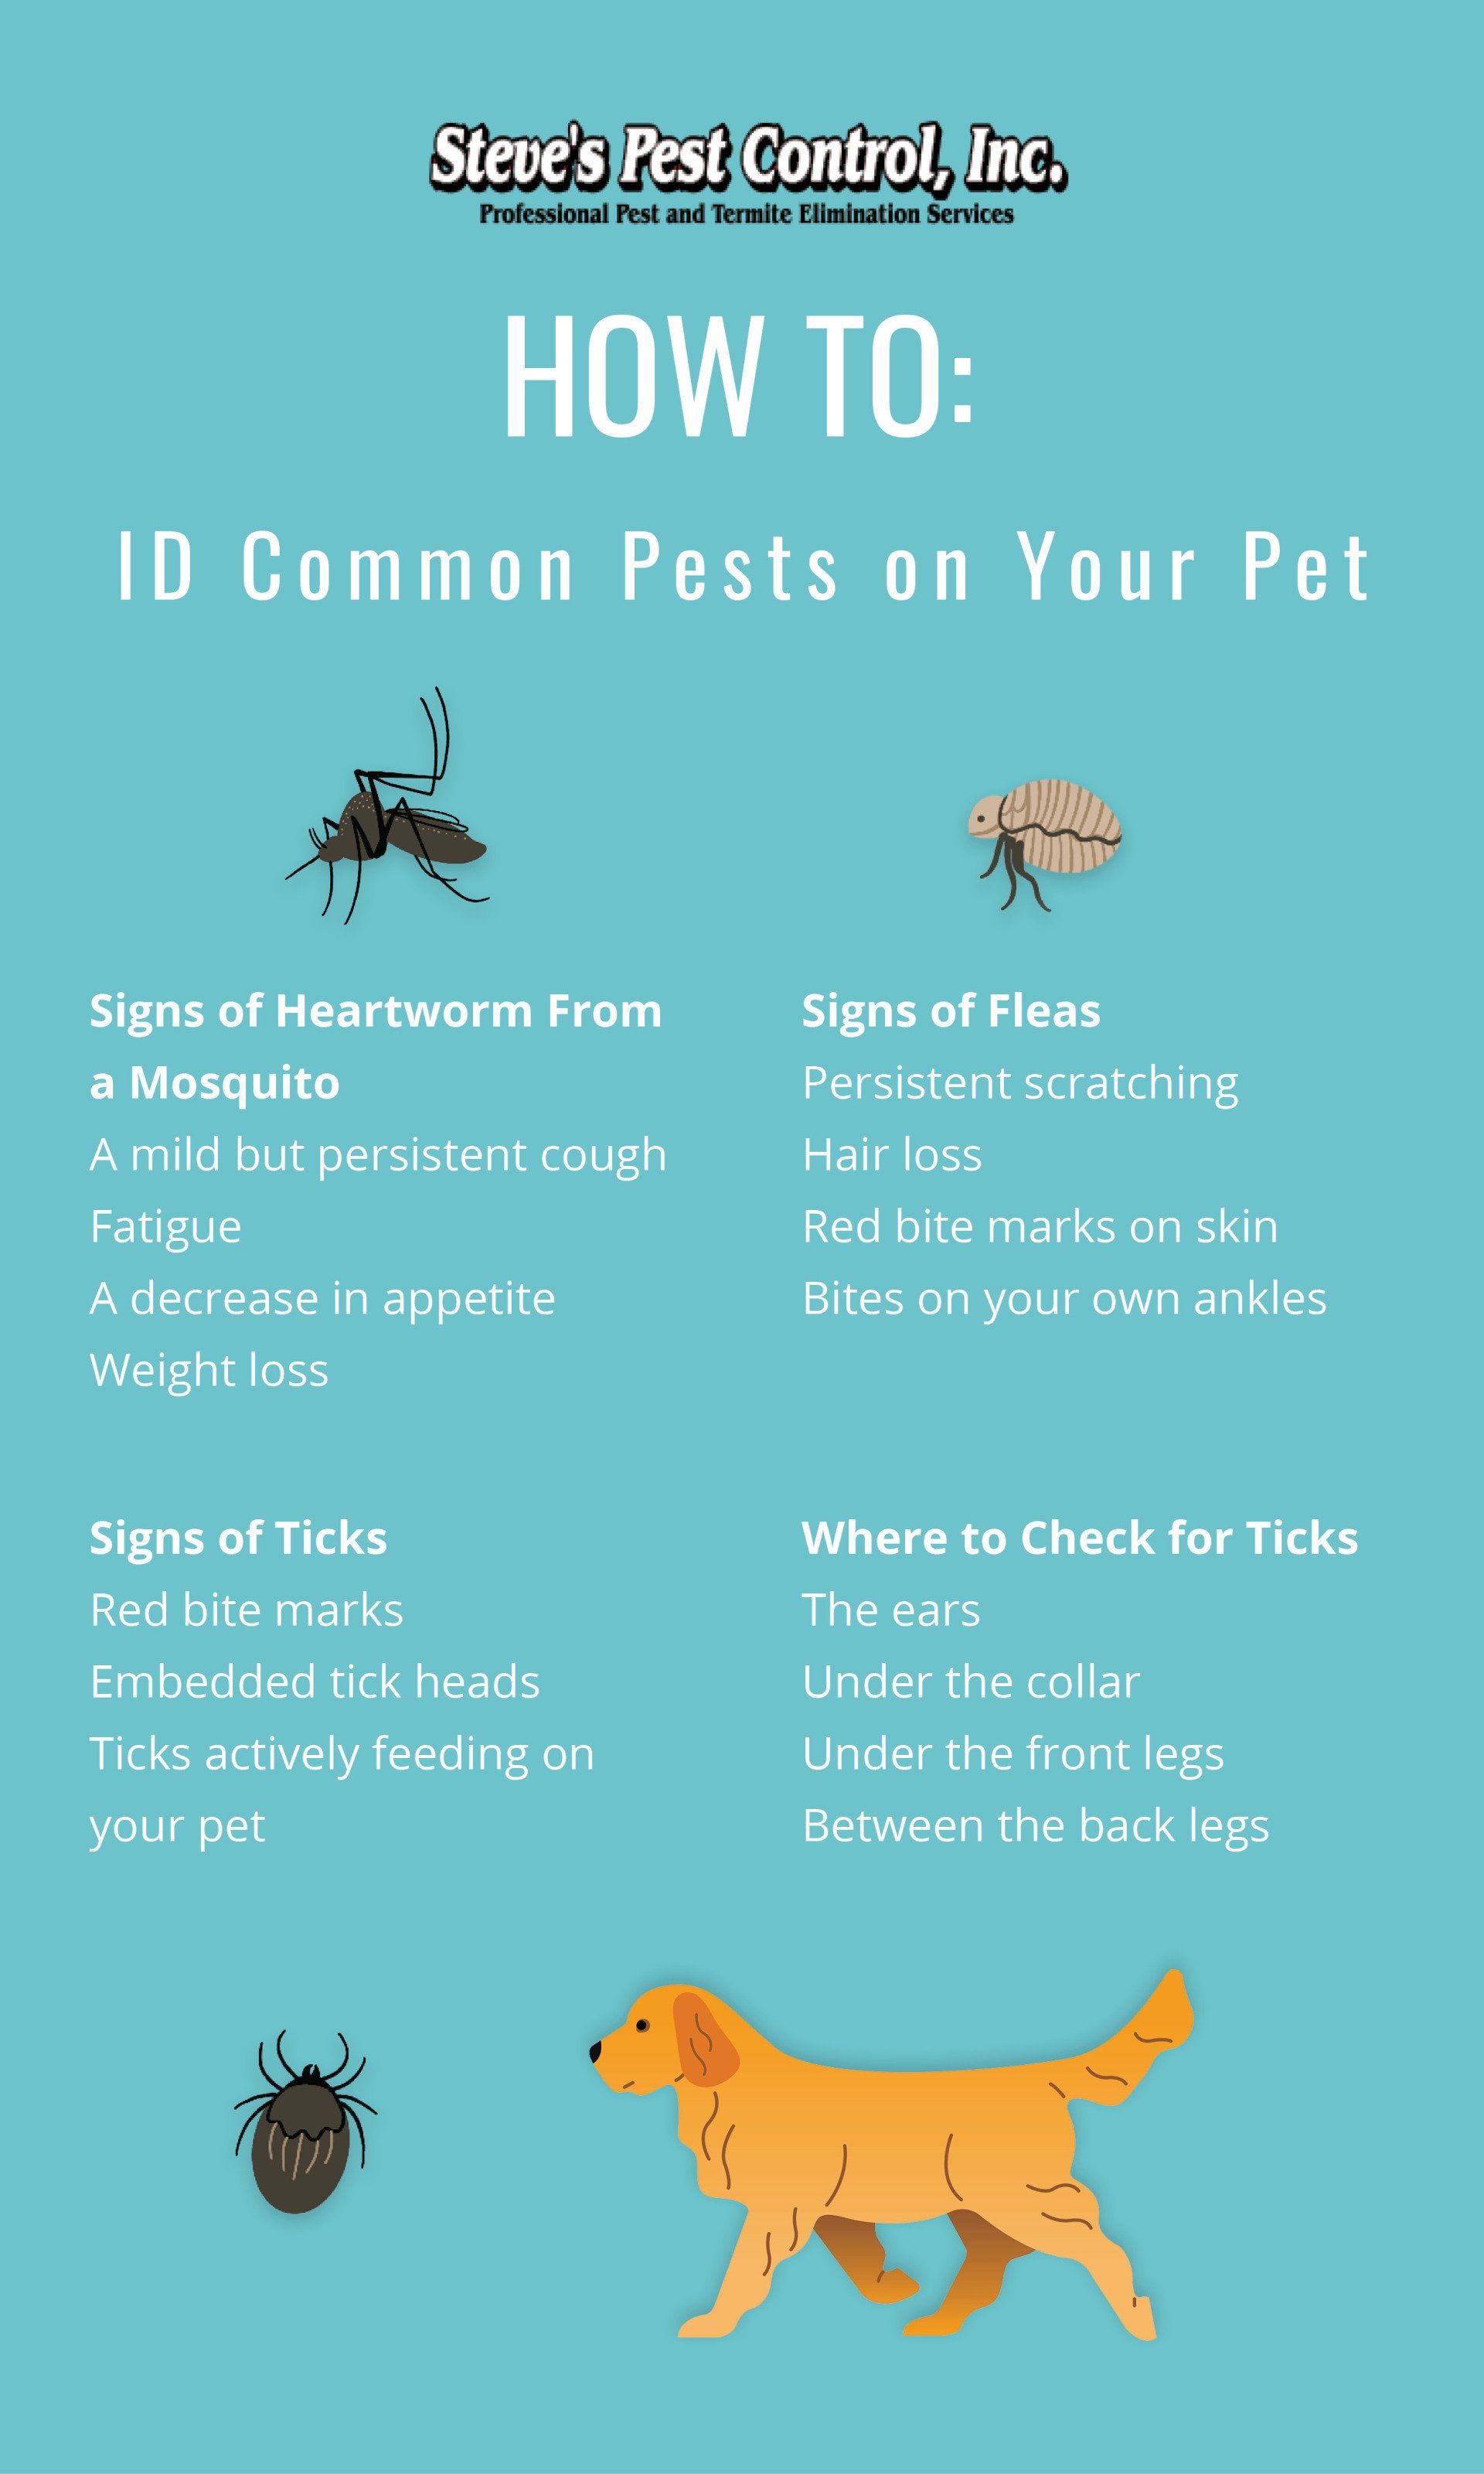 Learn how to identify common pests on your pet with Steve's Pest Control.